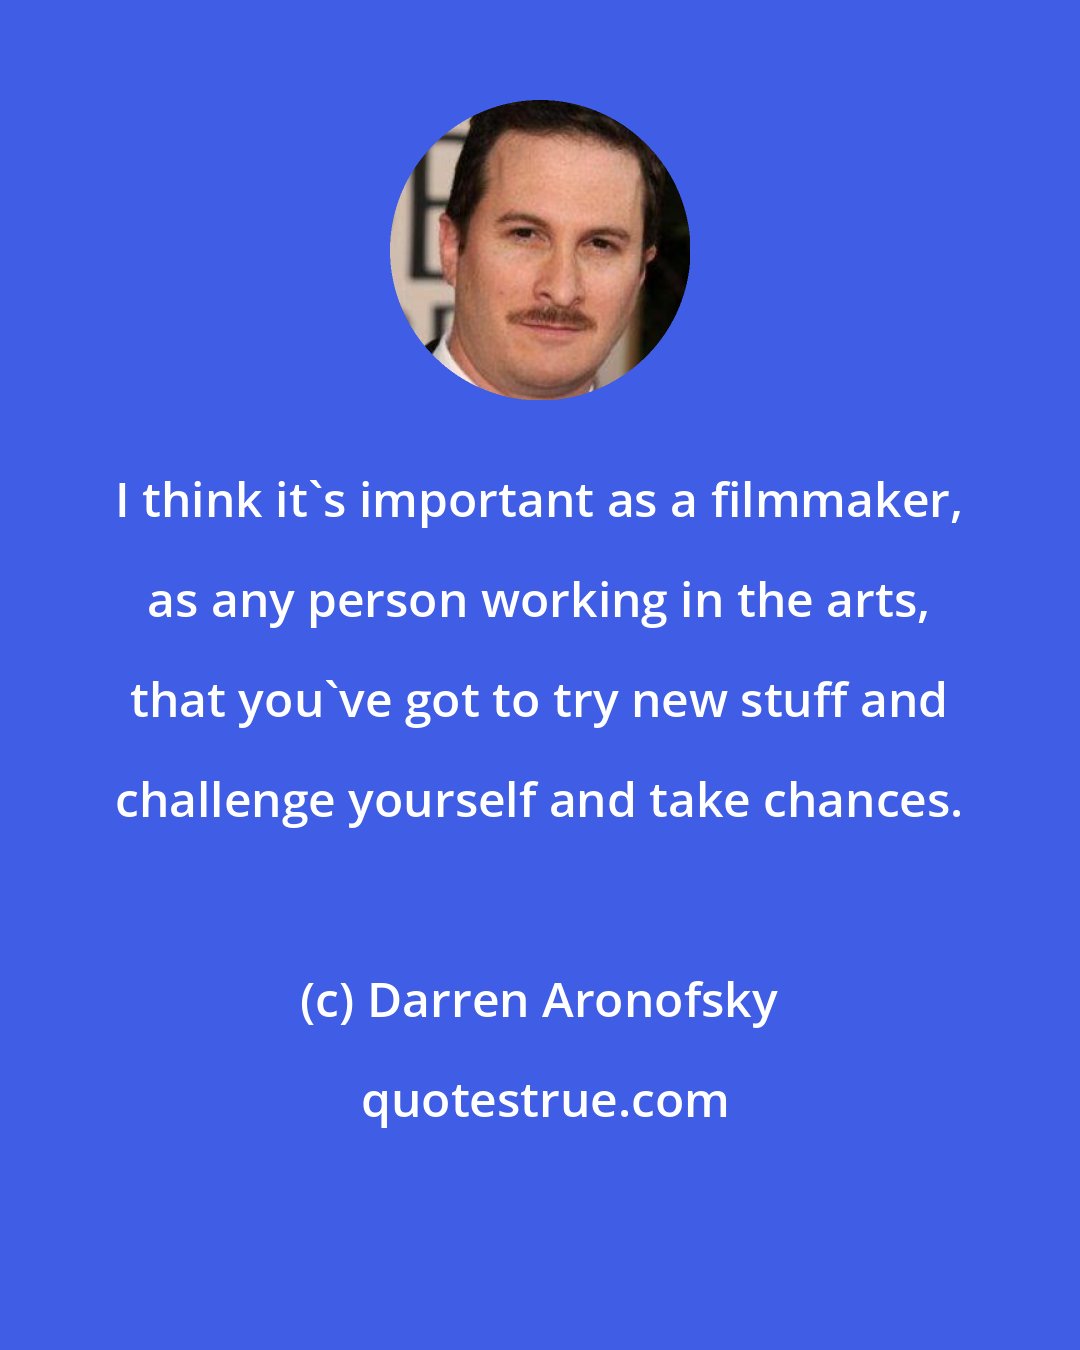 Darren Aronofsky: I think it's important as a filmmaker, as any person working in the arts, that you've got to try new stuff and challenge yourself and take chances.